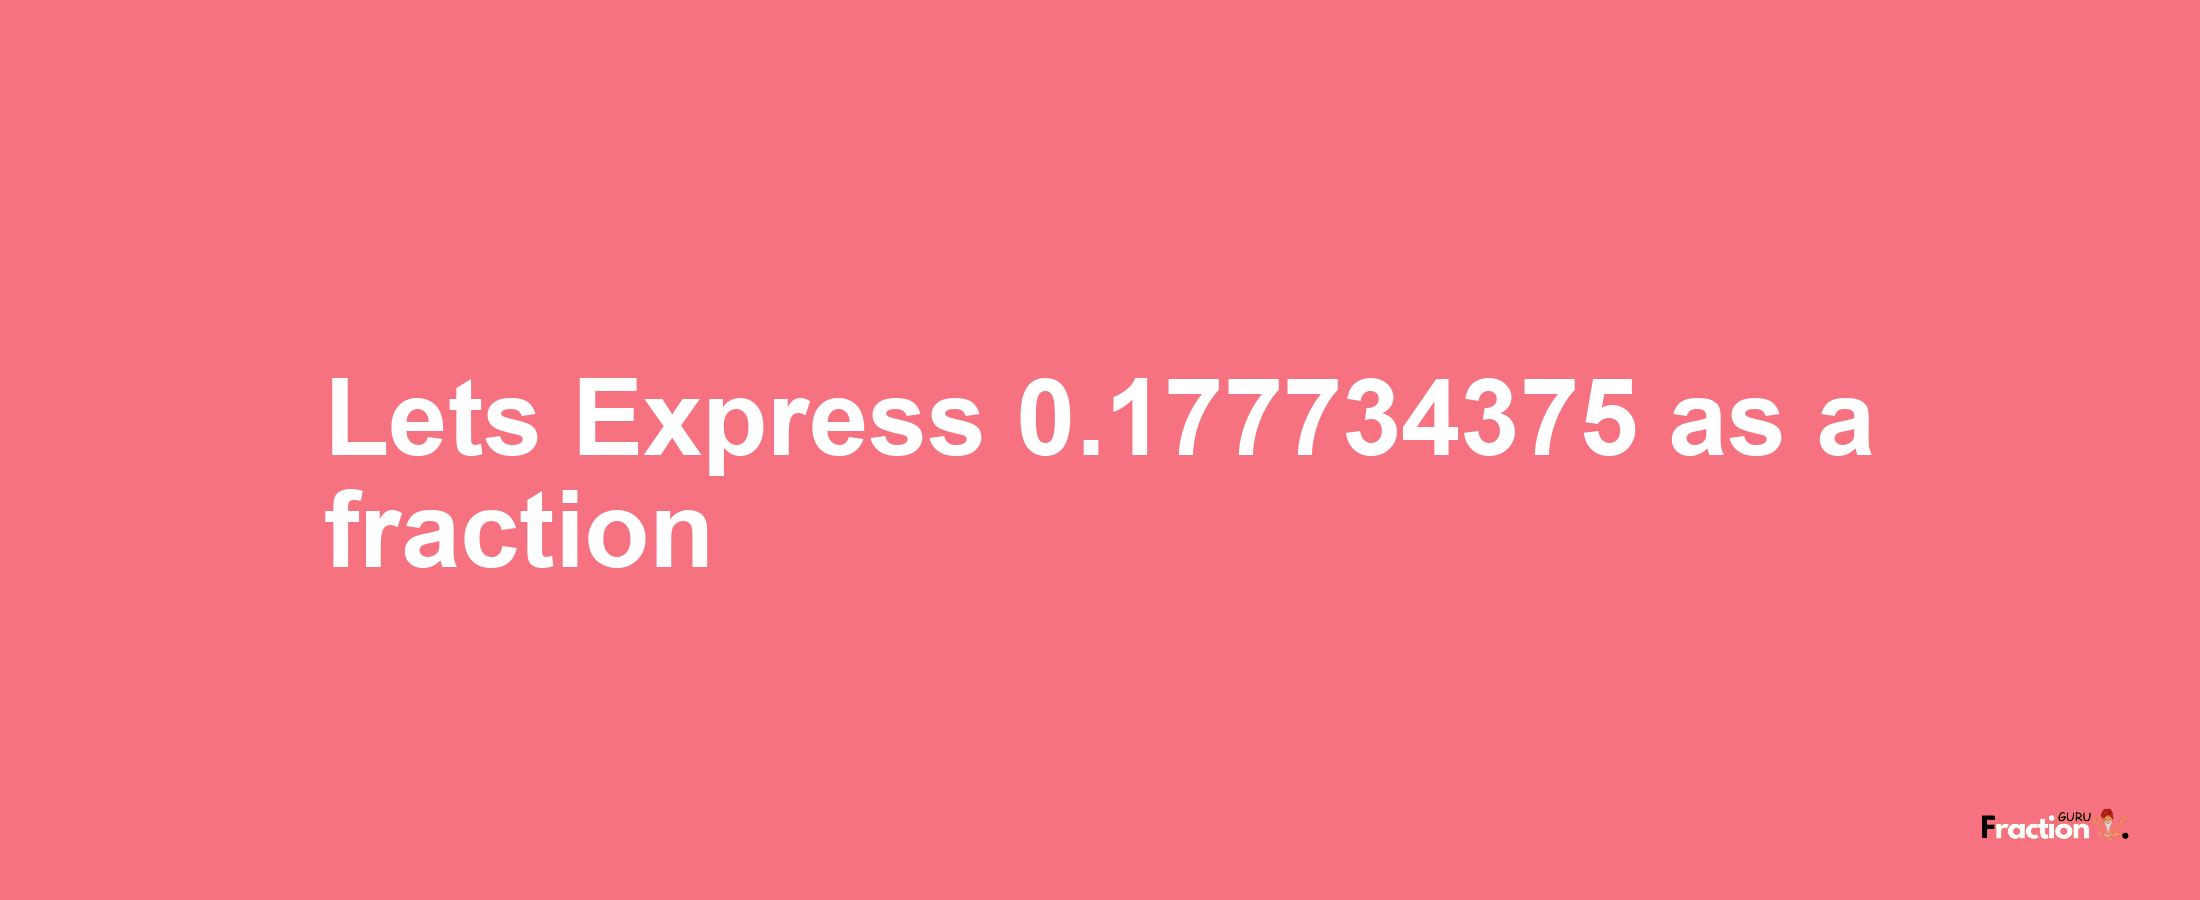 Lets Express 0.177734375 as afraction